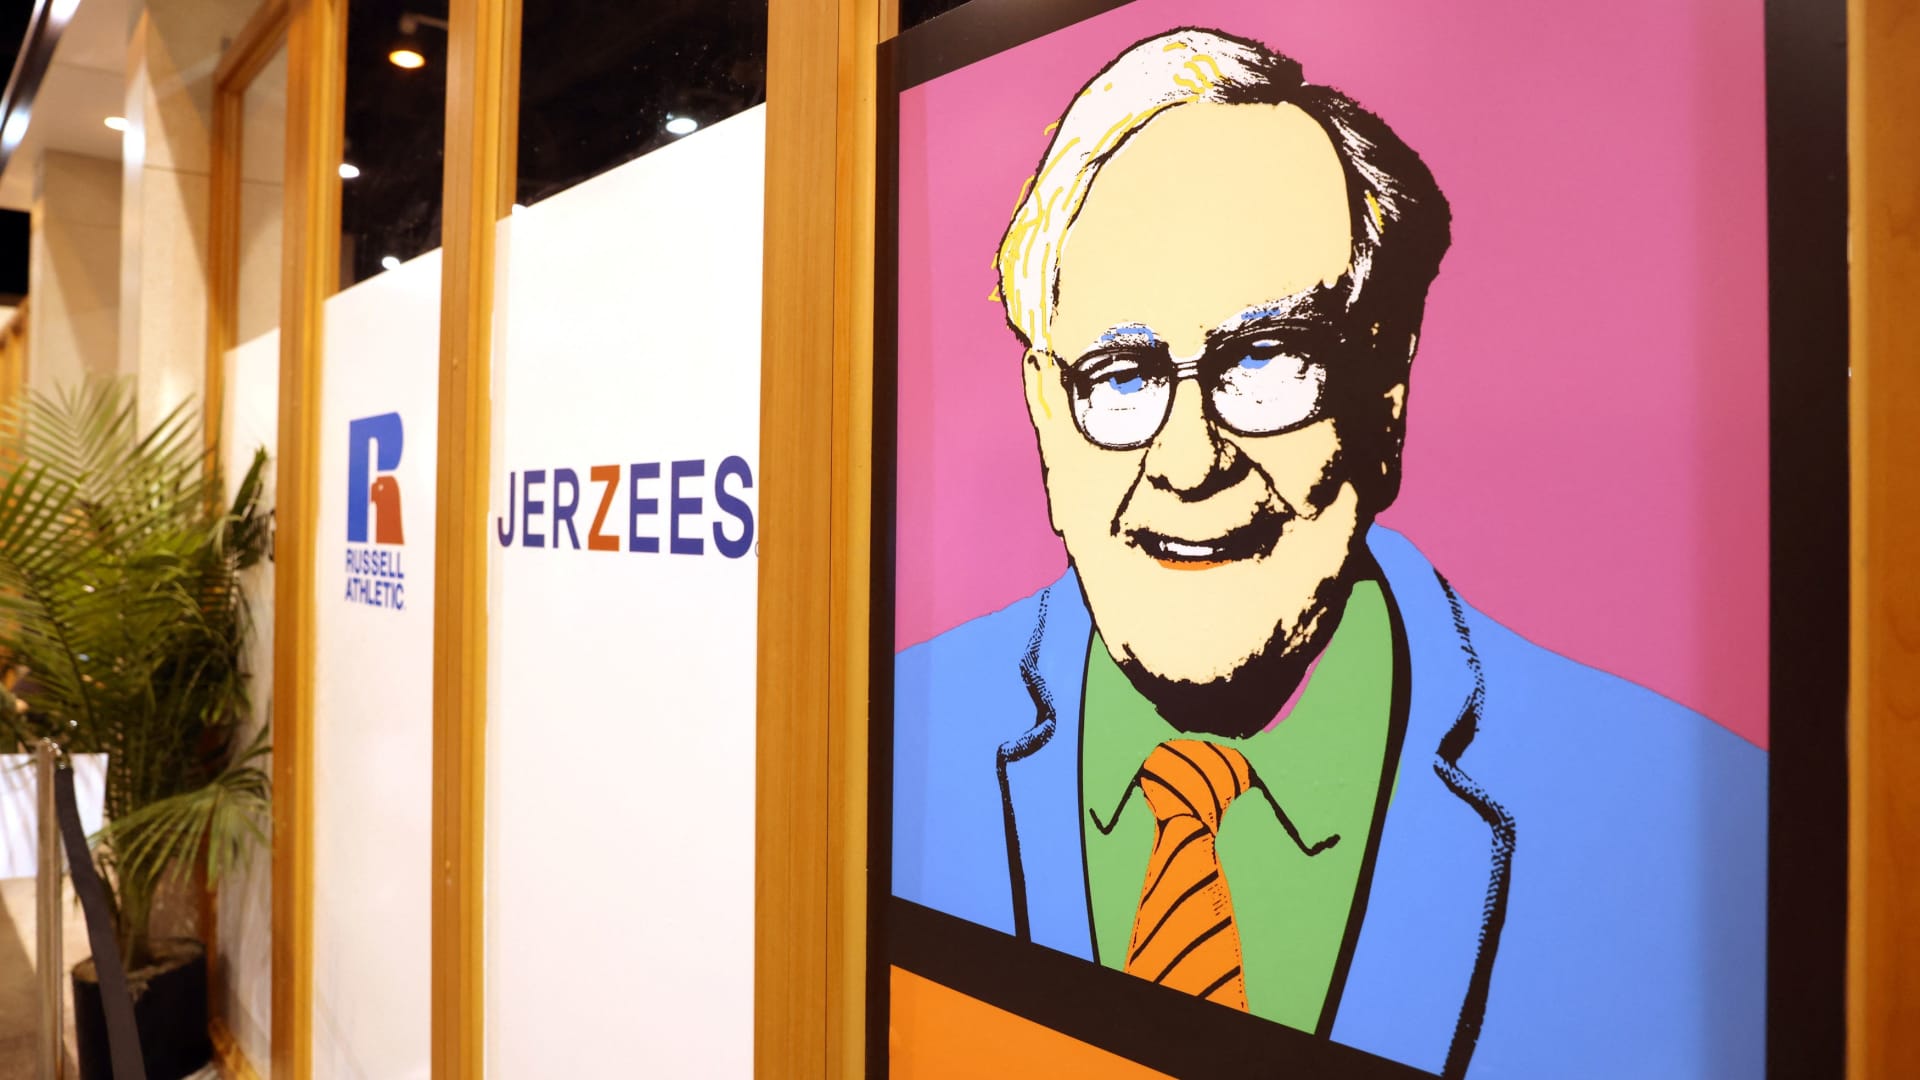 An Andy Warhol-like print of Berkshire Hathaway CEO Warren Buffett hangs outside a clothing stand during the first in-person annual meeting since 2019 of Berkshire Hathaway Inc in Omaha, Nebraska, U.S. April 30, 2022.